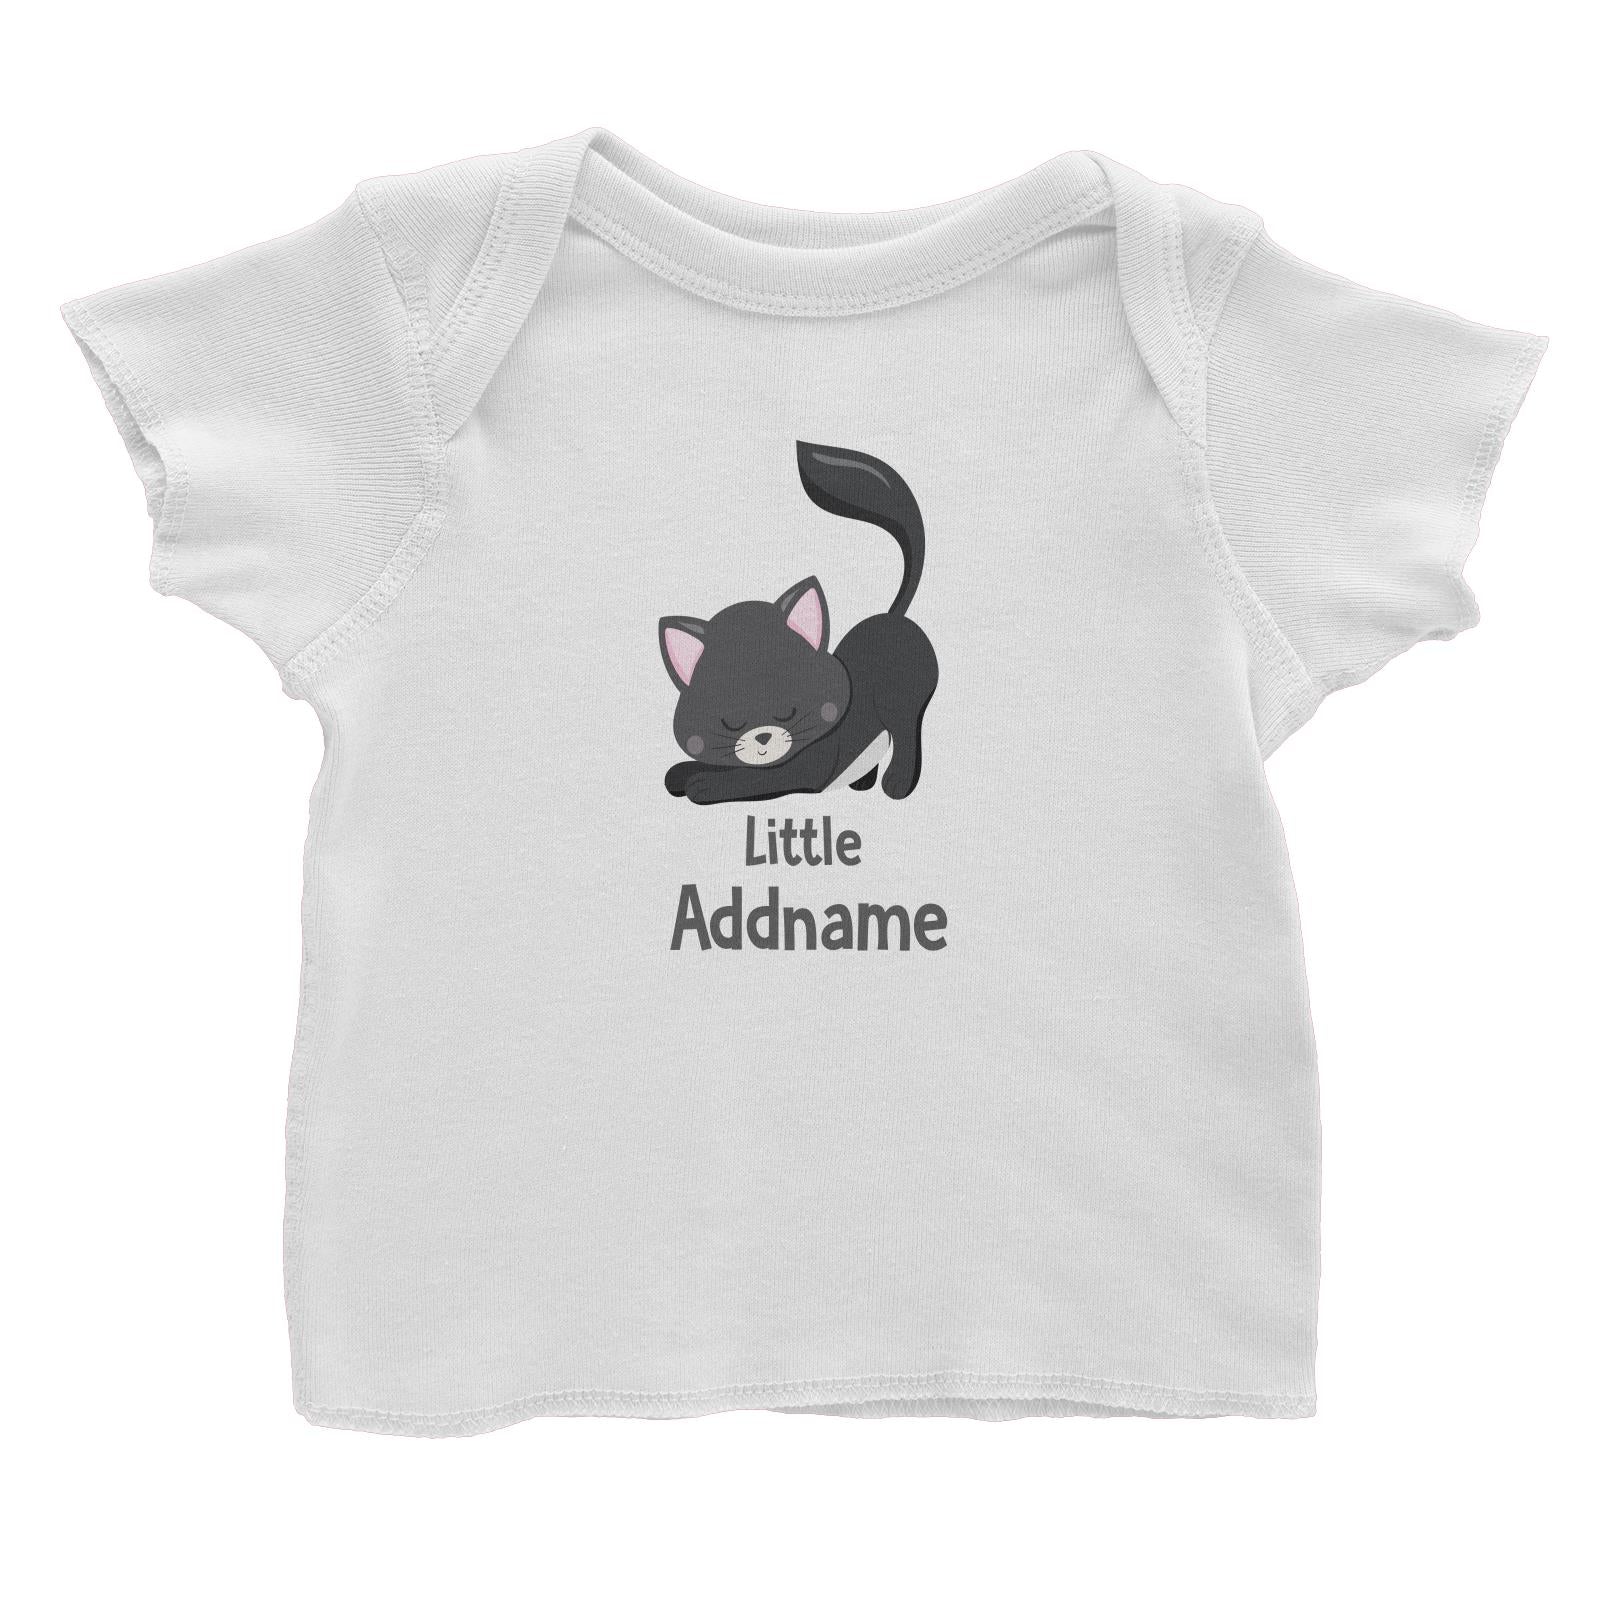 Adorable Cats Black Cat Little Addname Baby T-Shirt